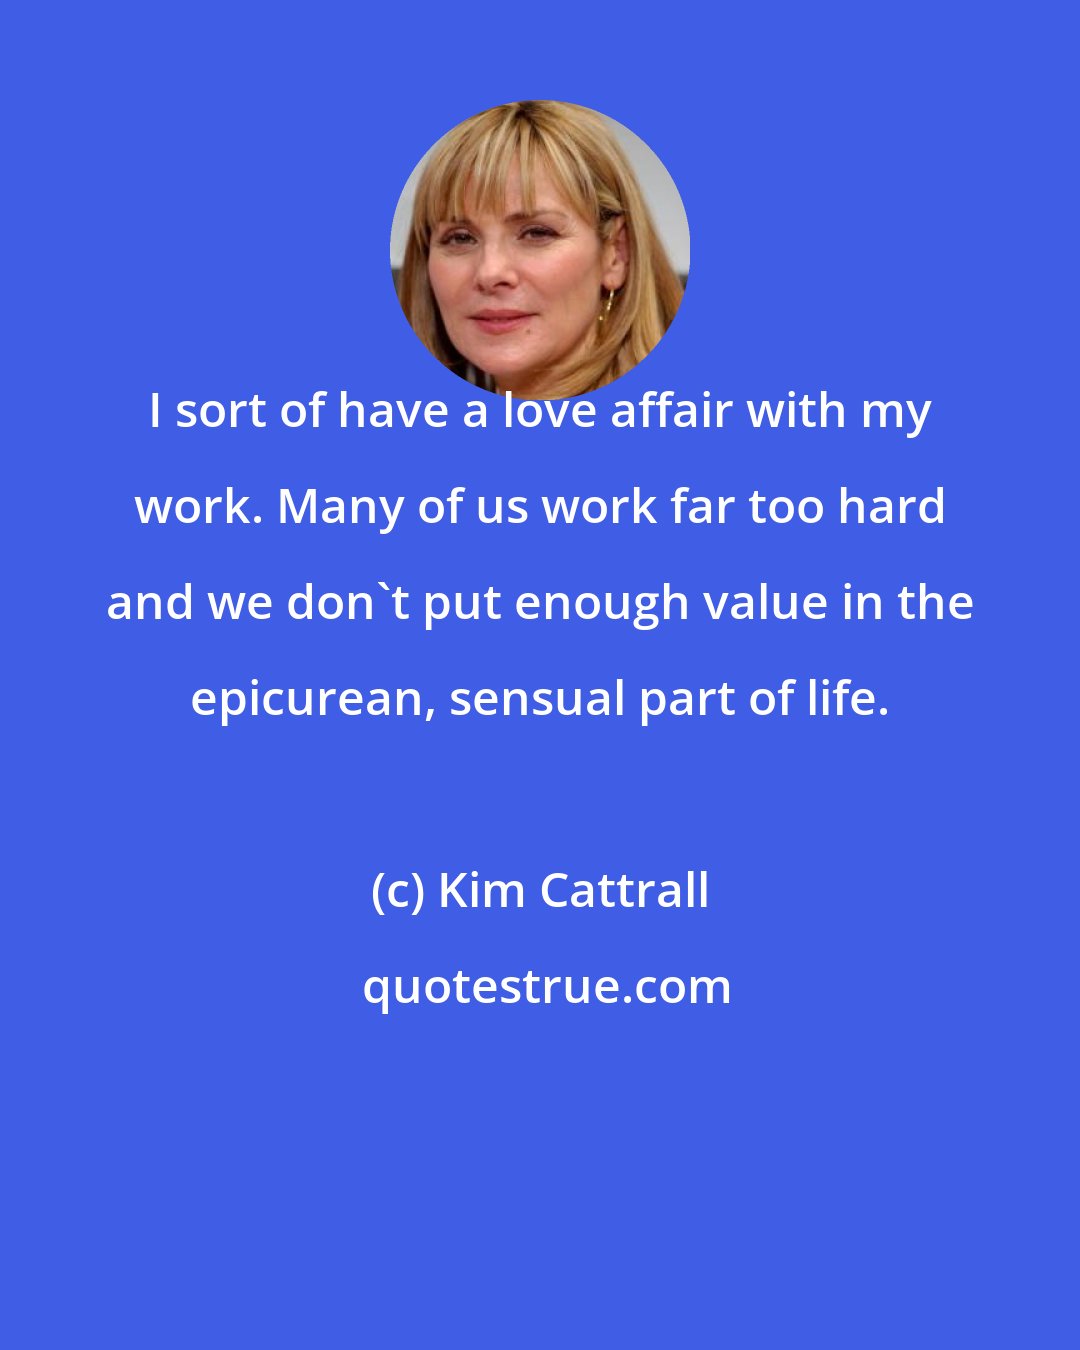 Kim Cattrall: I sort of have a love affair with my work. Many of us work far too hard and we don't put enough value in the epicurean, sensual part of life.